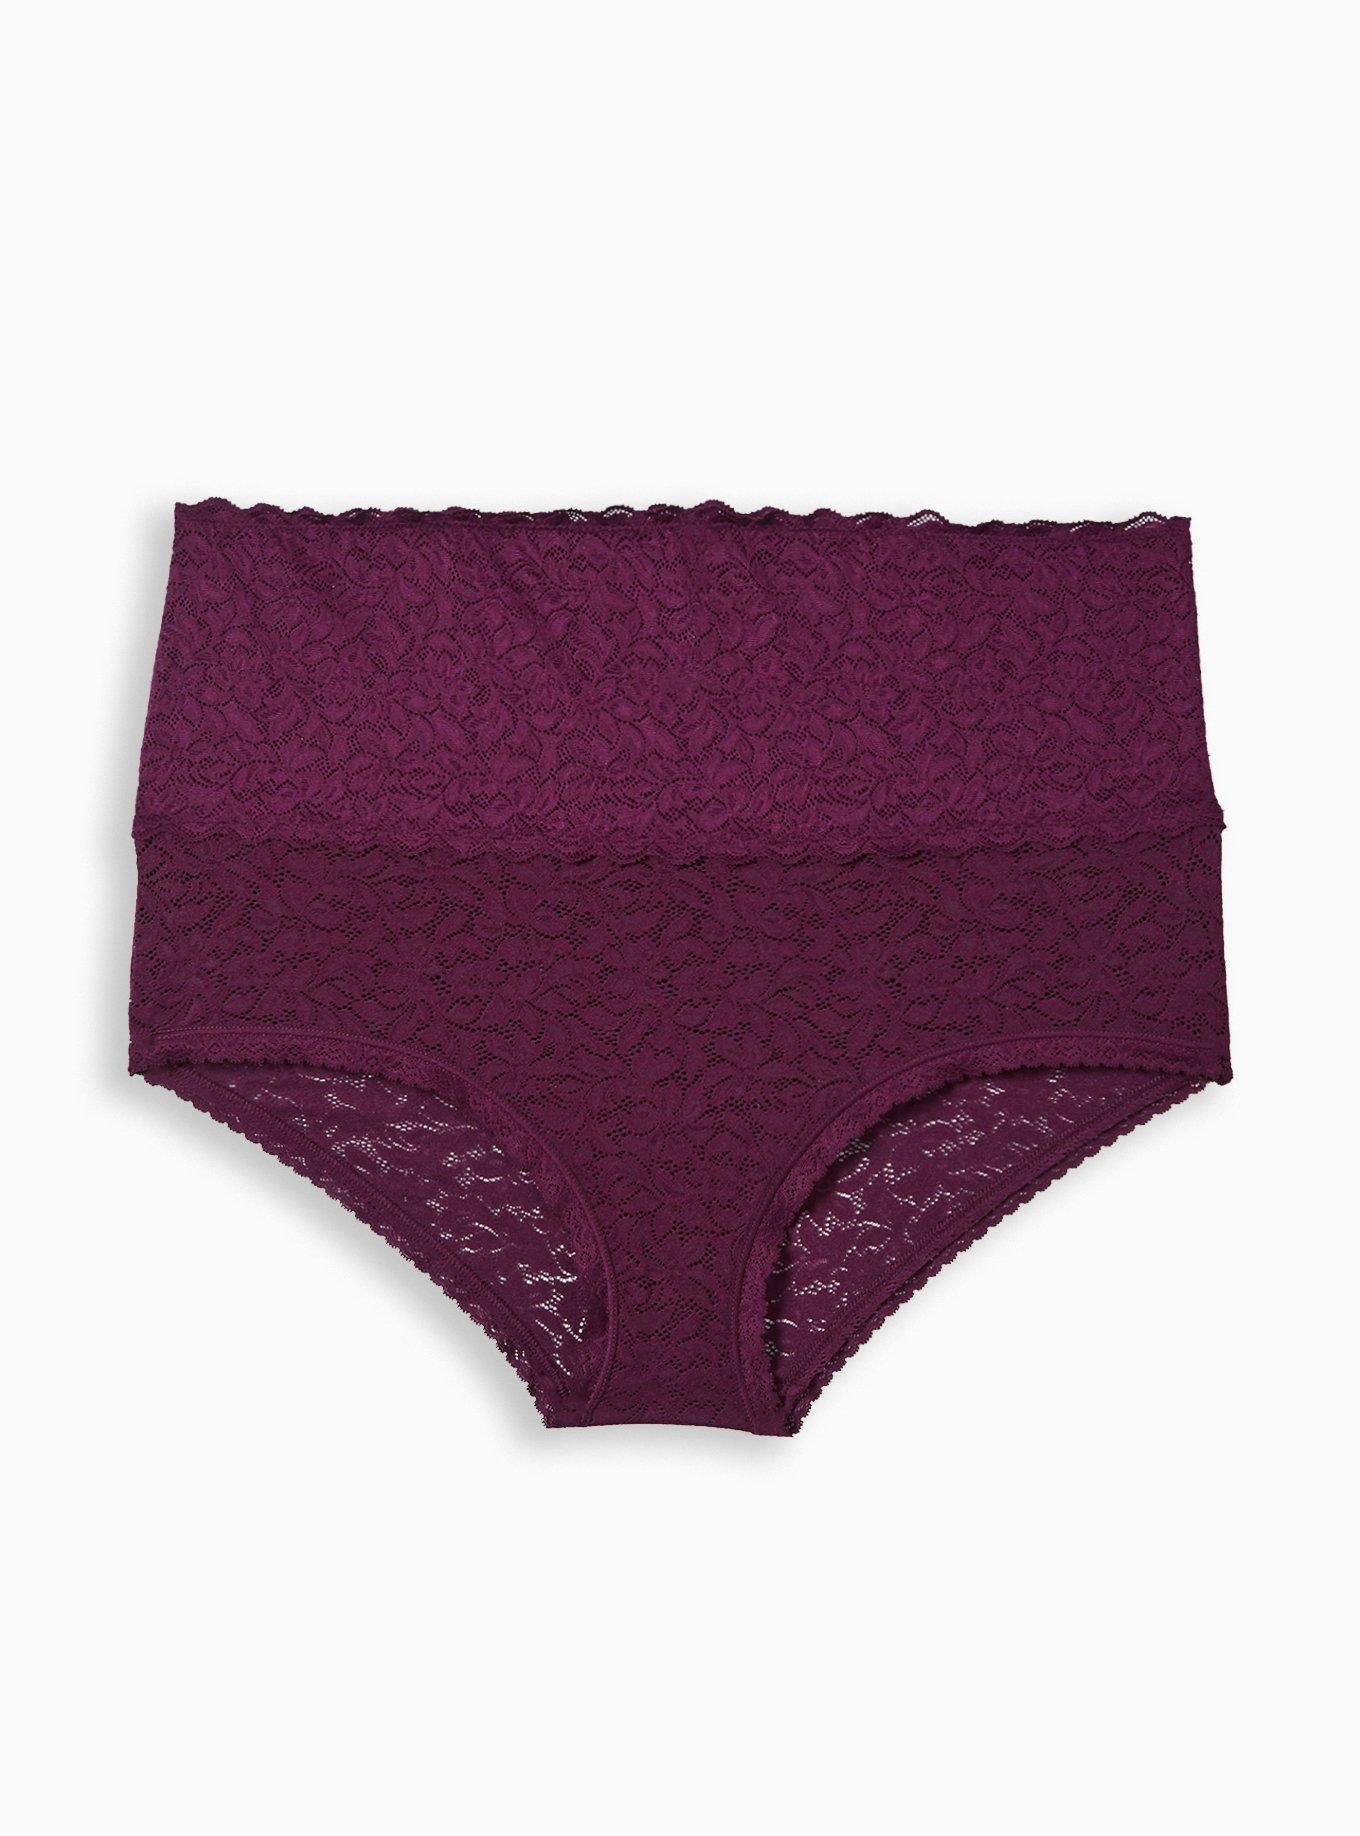 Plus Size - 4-Way Stretch Lace High-Rise Brief Panty - Torrid